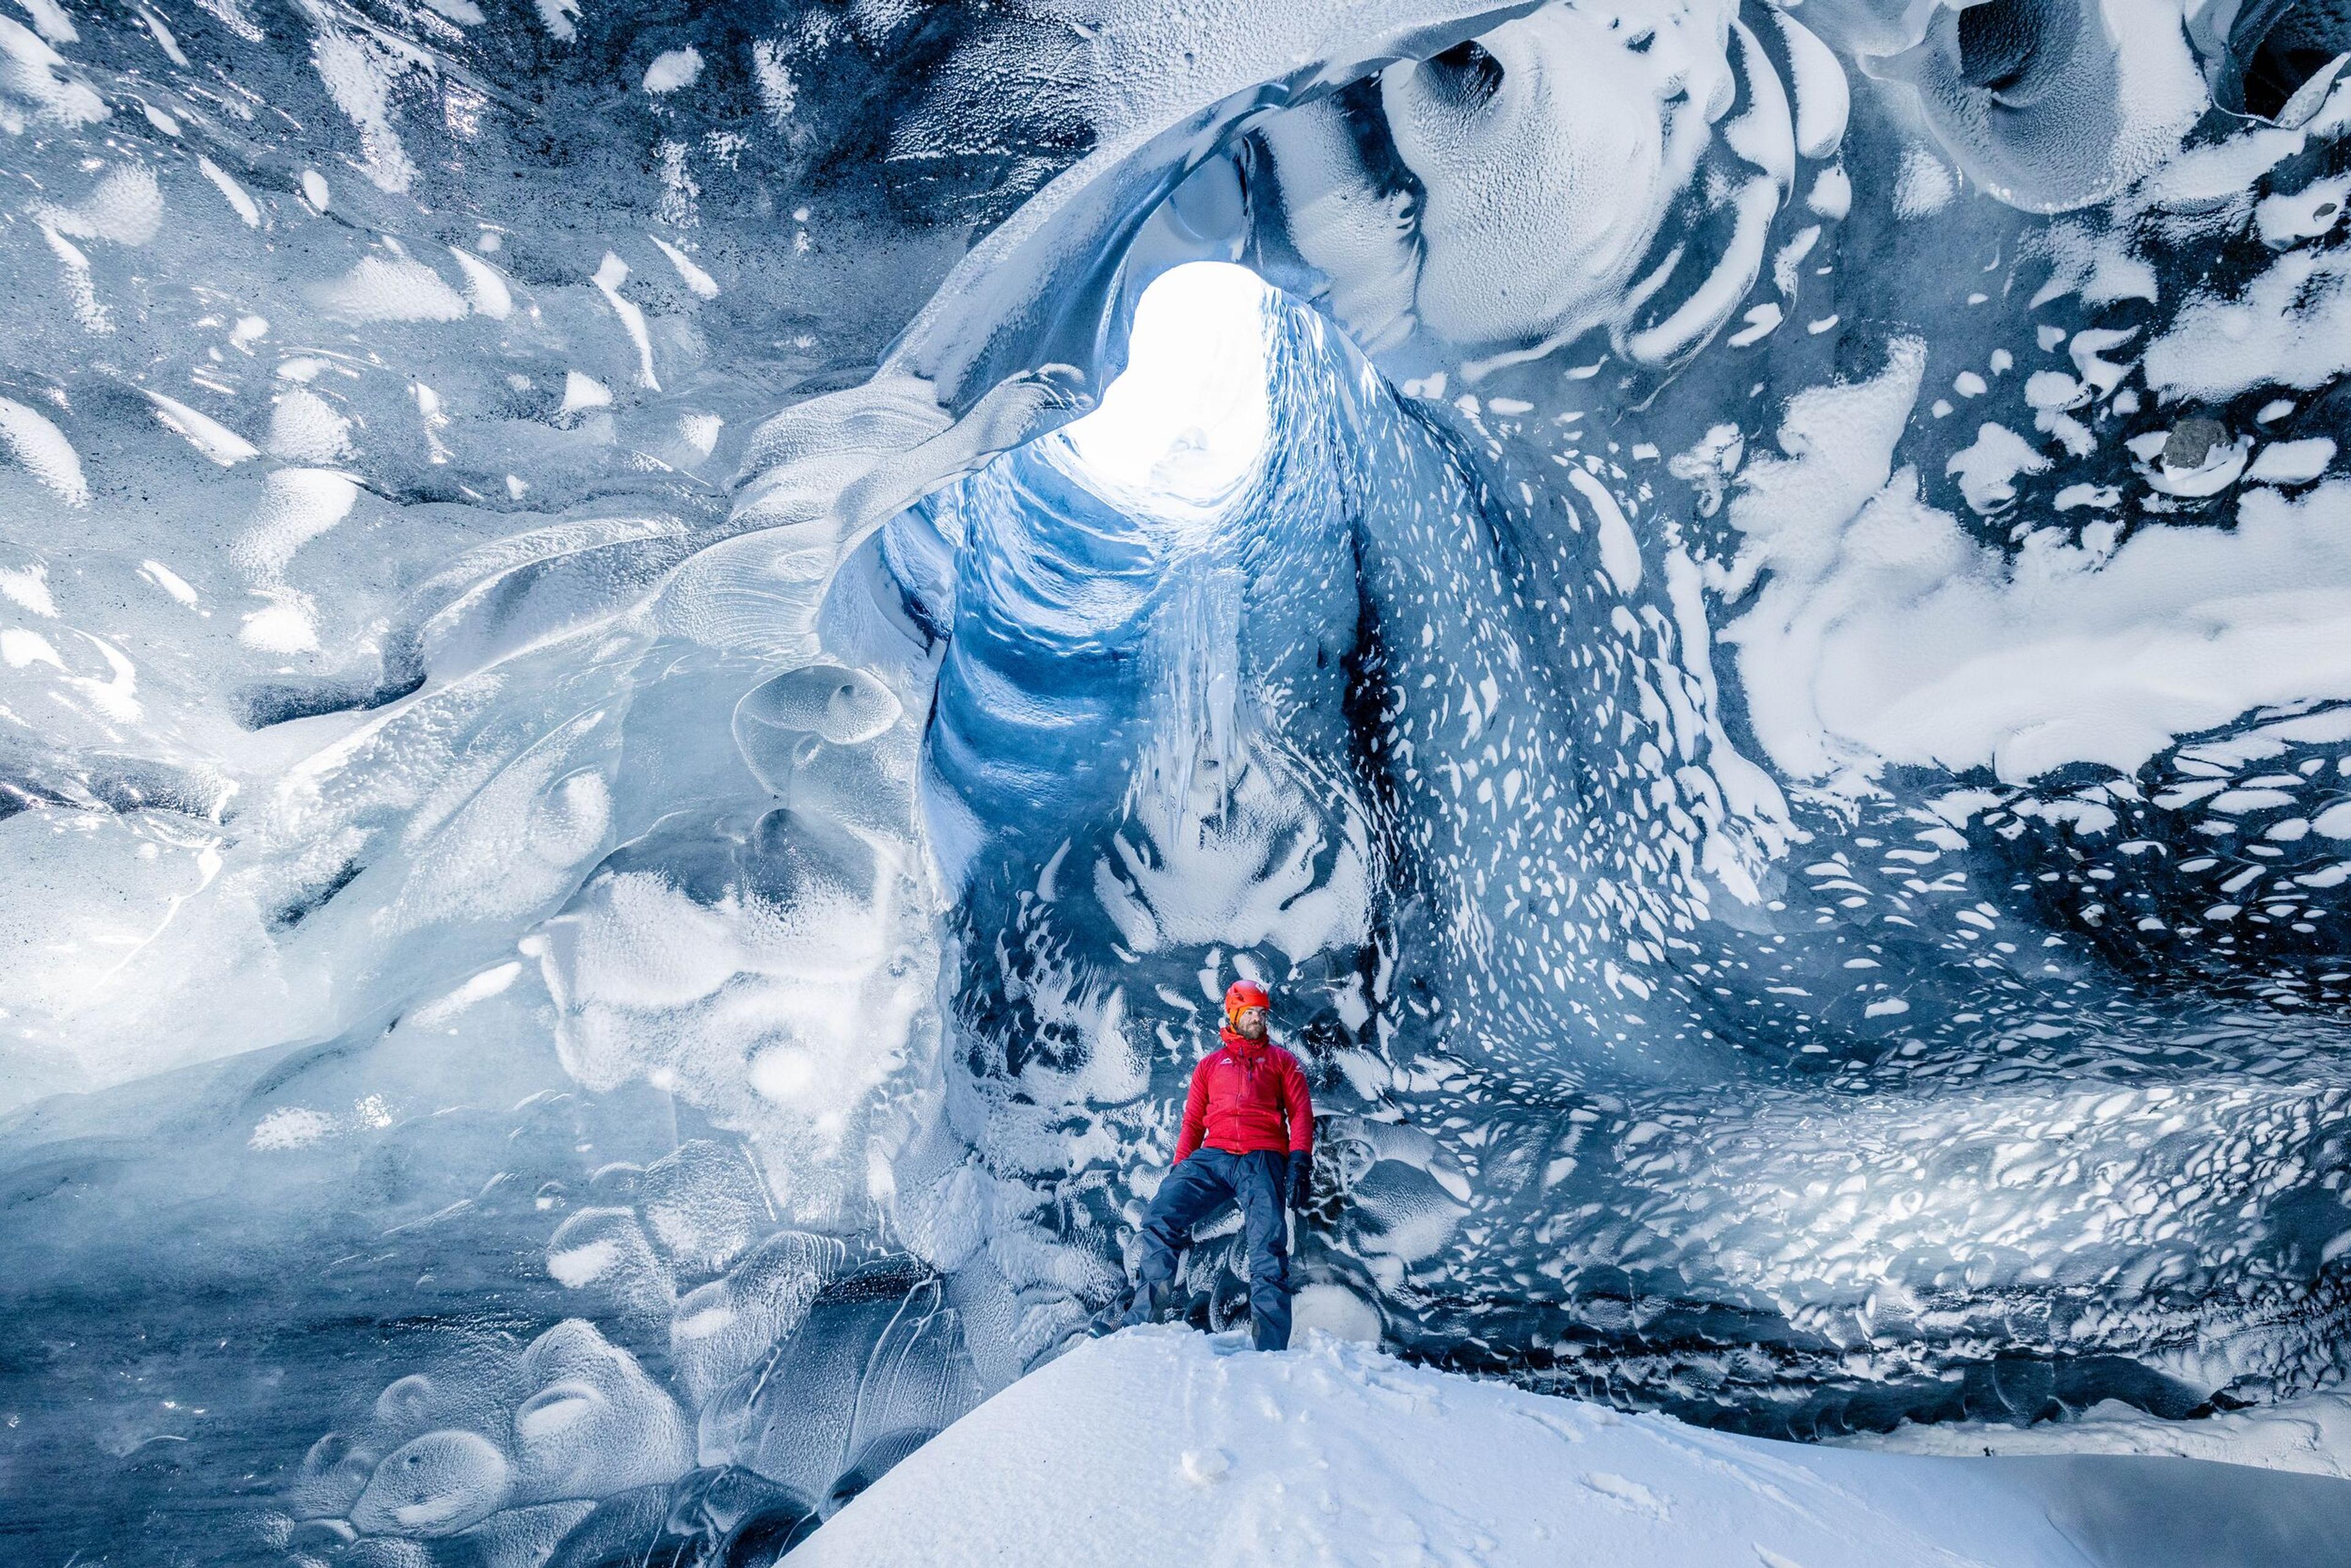 The view from inside a spacious ice cave looking outwards, with a person in a red jacket visible in the distance. The cave is characterized by its remarkable icy structures that hang from the ceiling and rise from the ground.